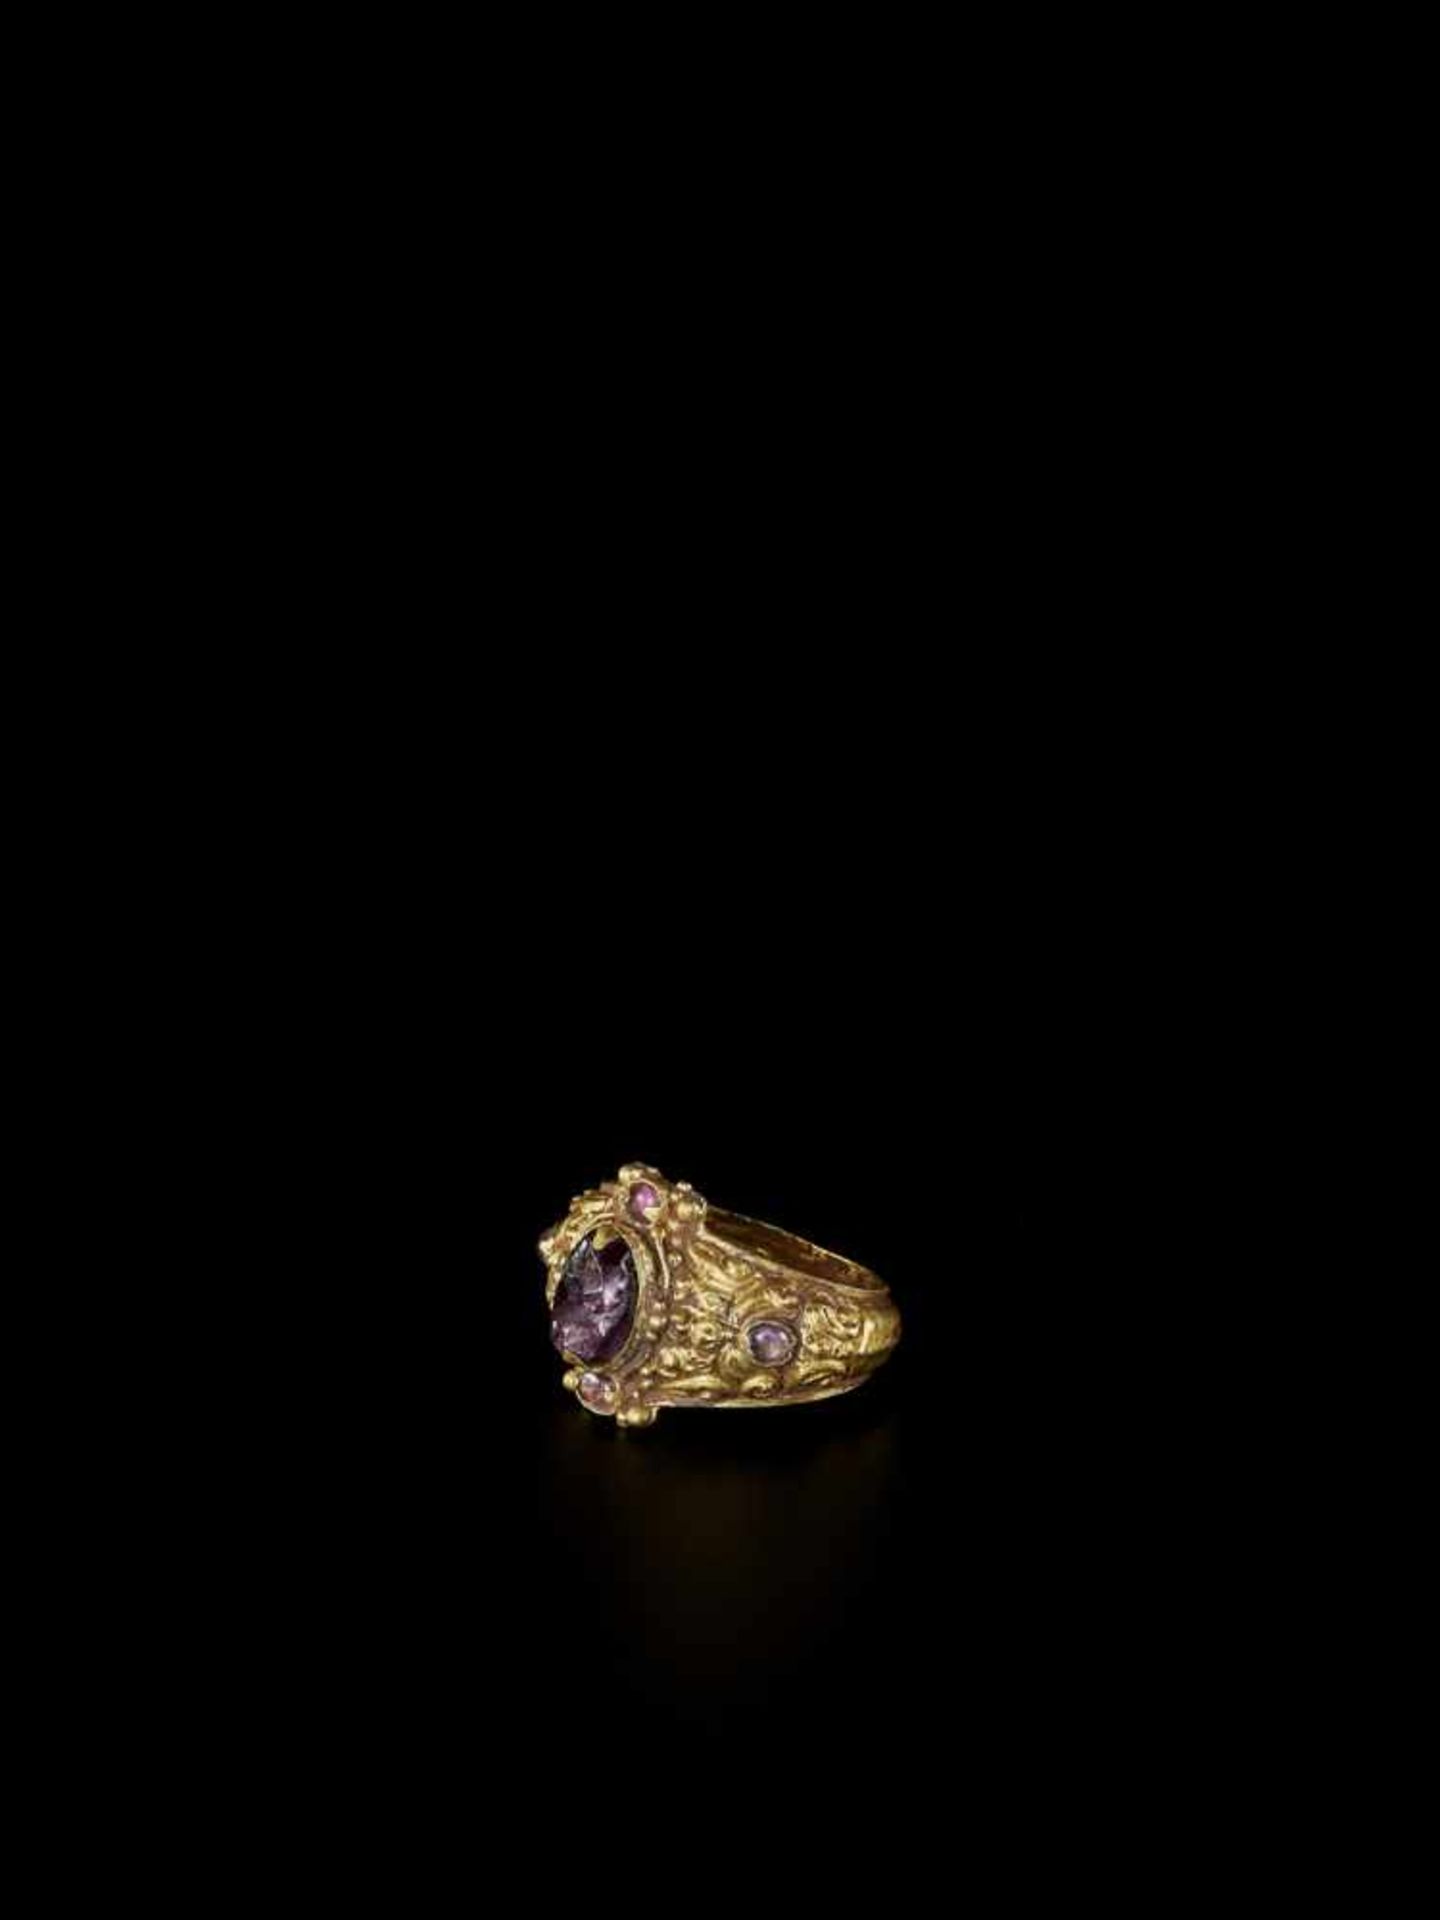 A CHAM REPOUSSÉ GOLD RING WITH AMETHYSTS Champa, c. 10th – 12th century. The richly decorated ring